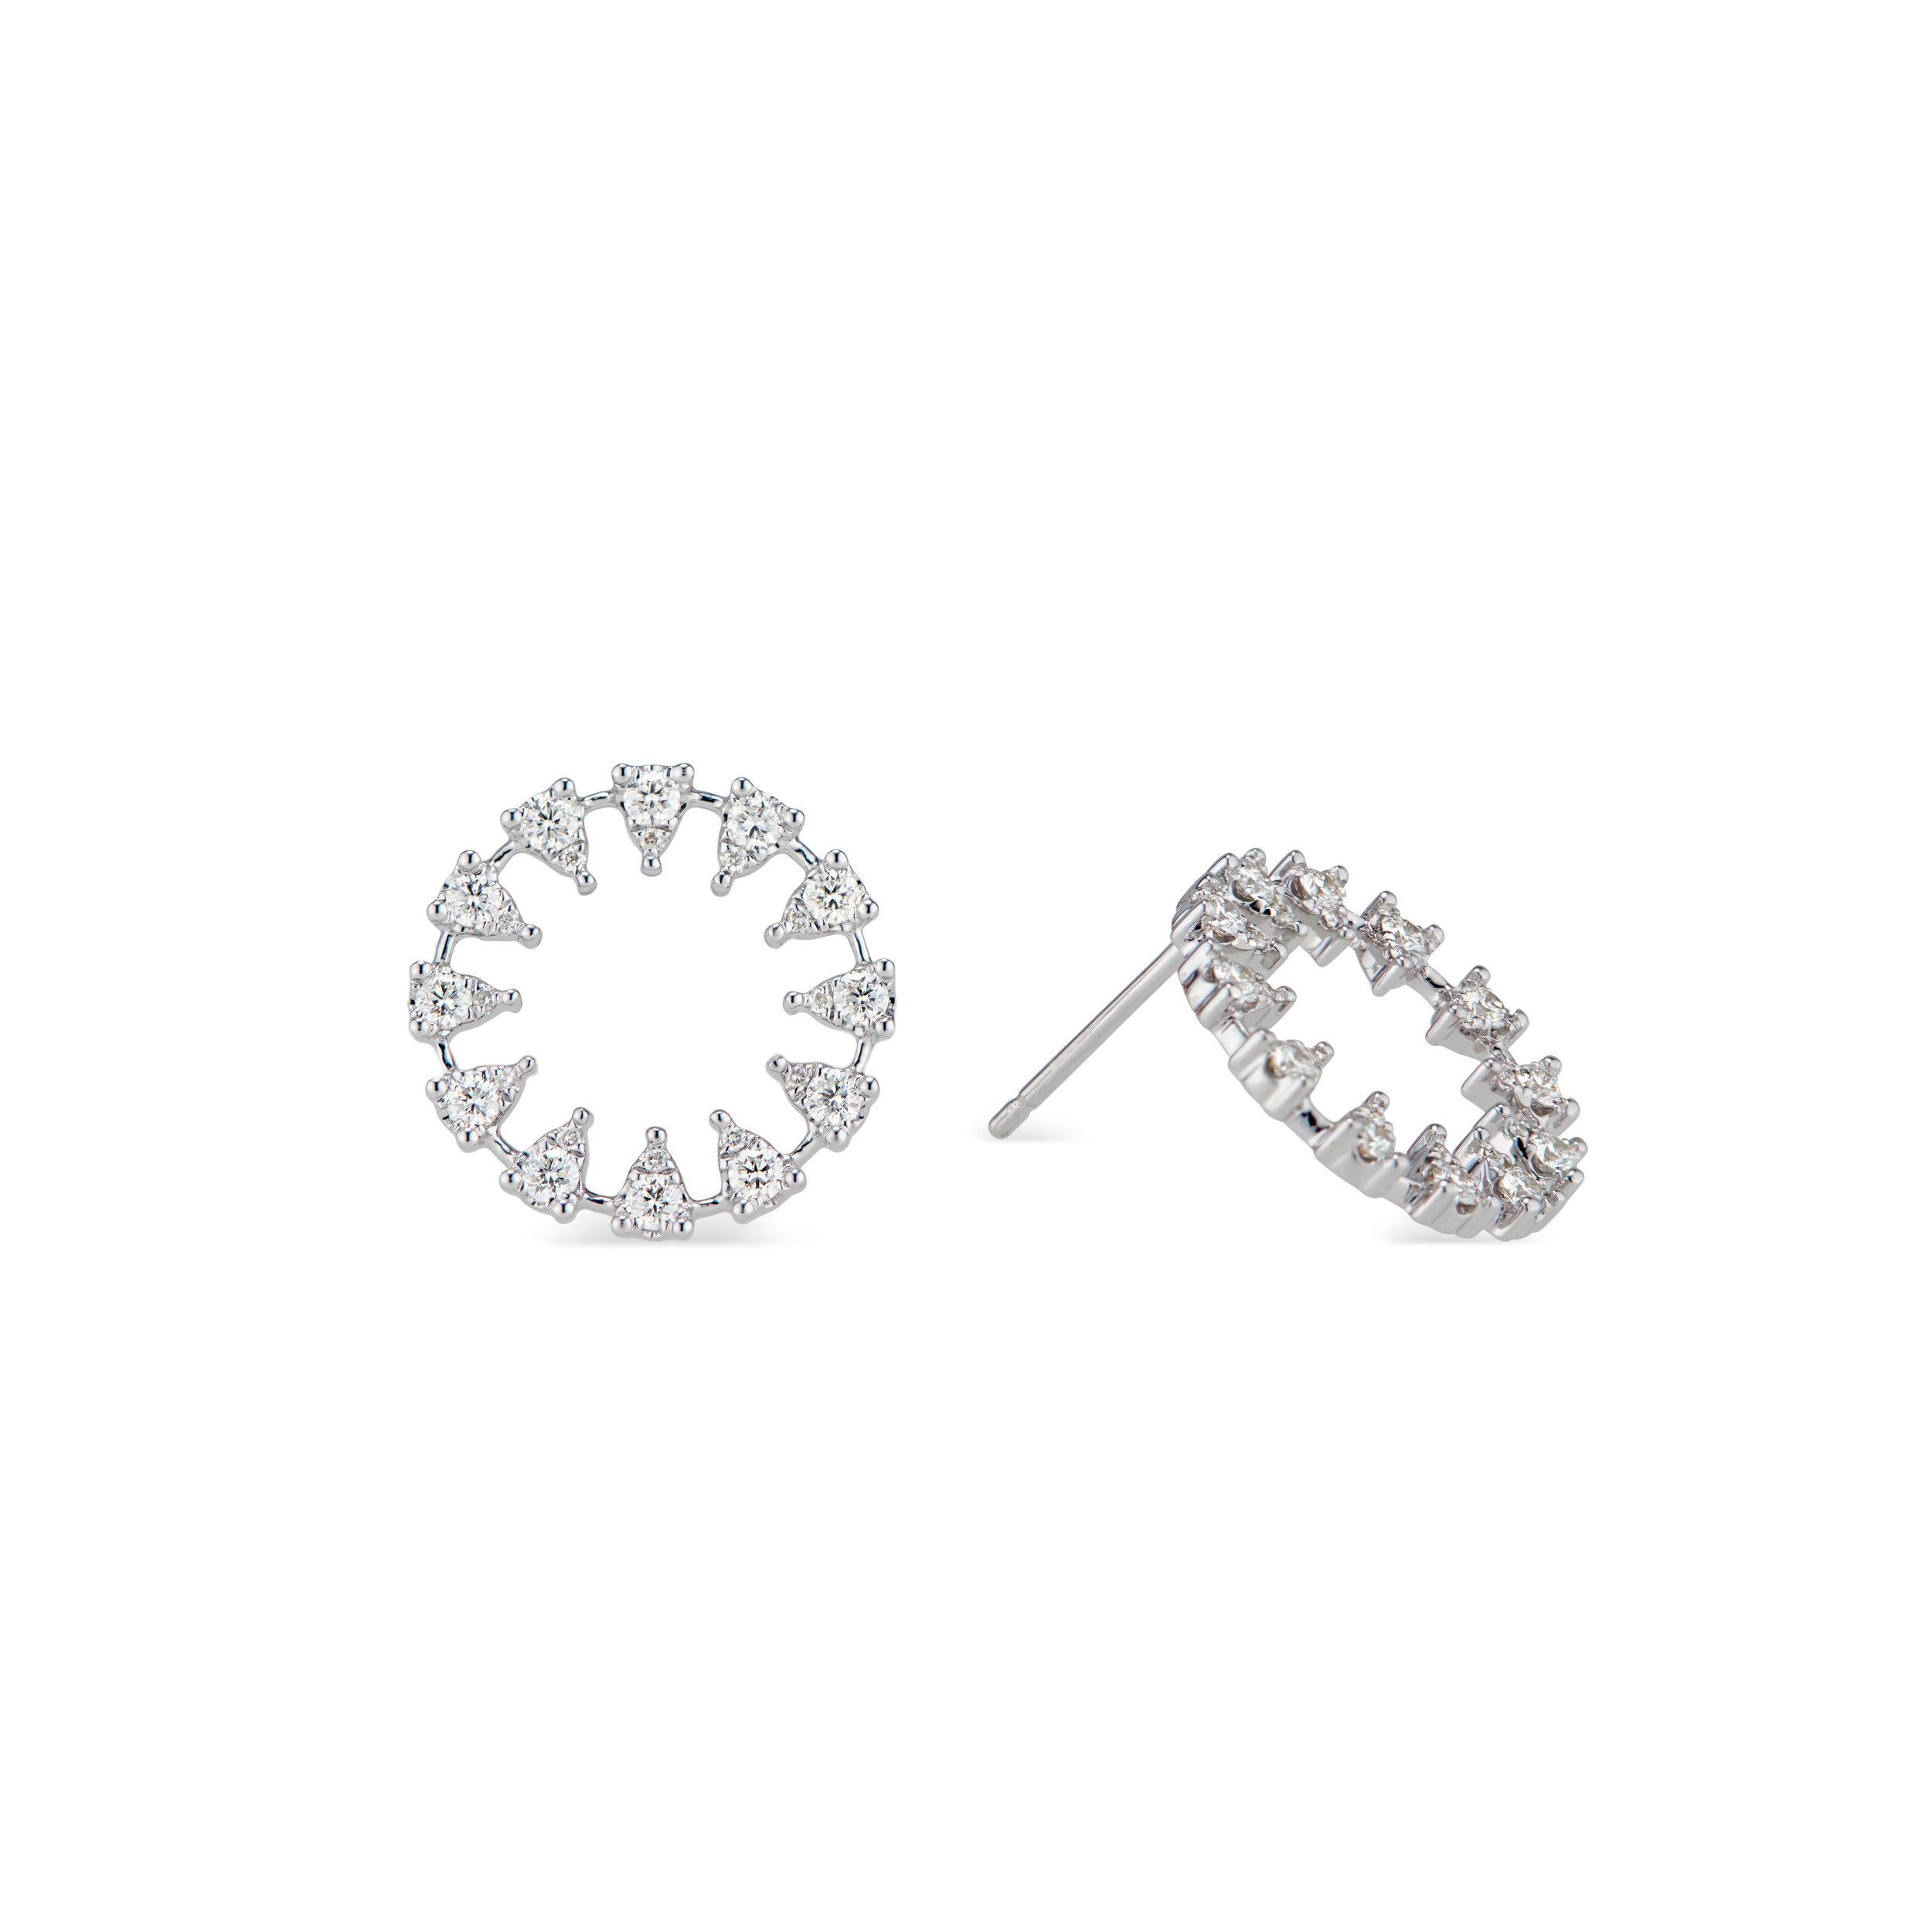 An circular hoop of triangles make a bold statement in Ri Noor’s Reve Round Diamond Earrings. Each triangle features a cluster of brilliant white diamonds, creating a dazzling visage that sparkles as it's hit by light. The unique earrings add a